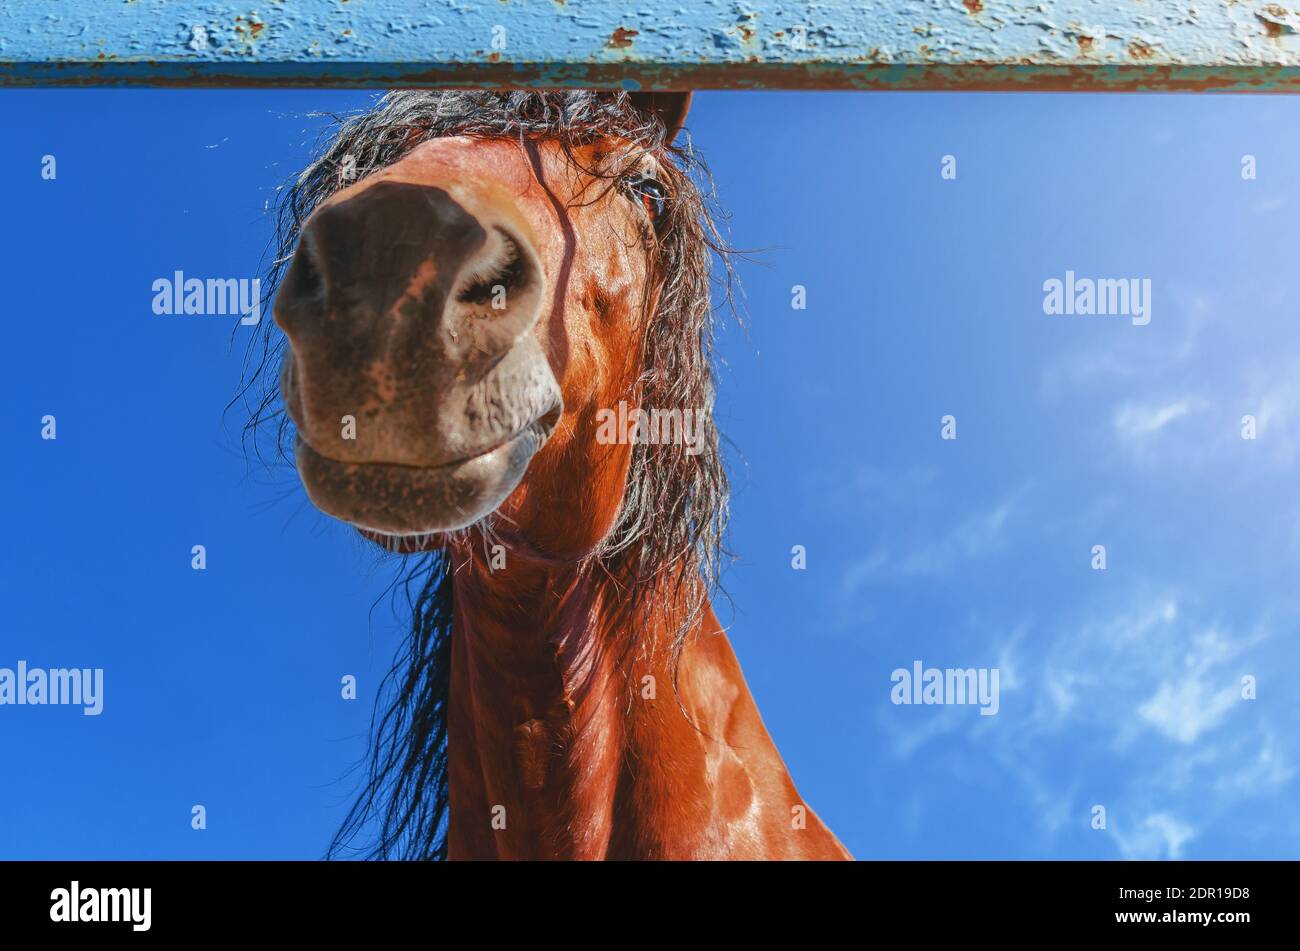 Cute Horse, Head, Looking Down At Camera On Background Of Blue Sky. Stock Photo